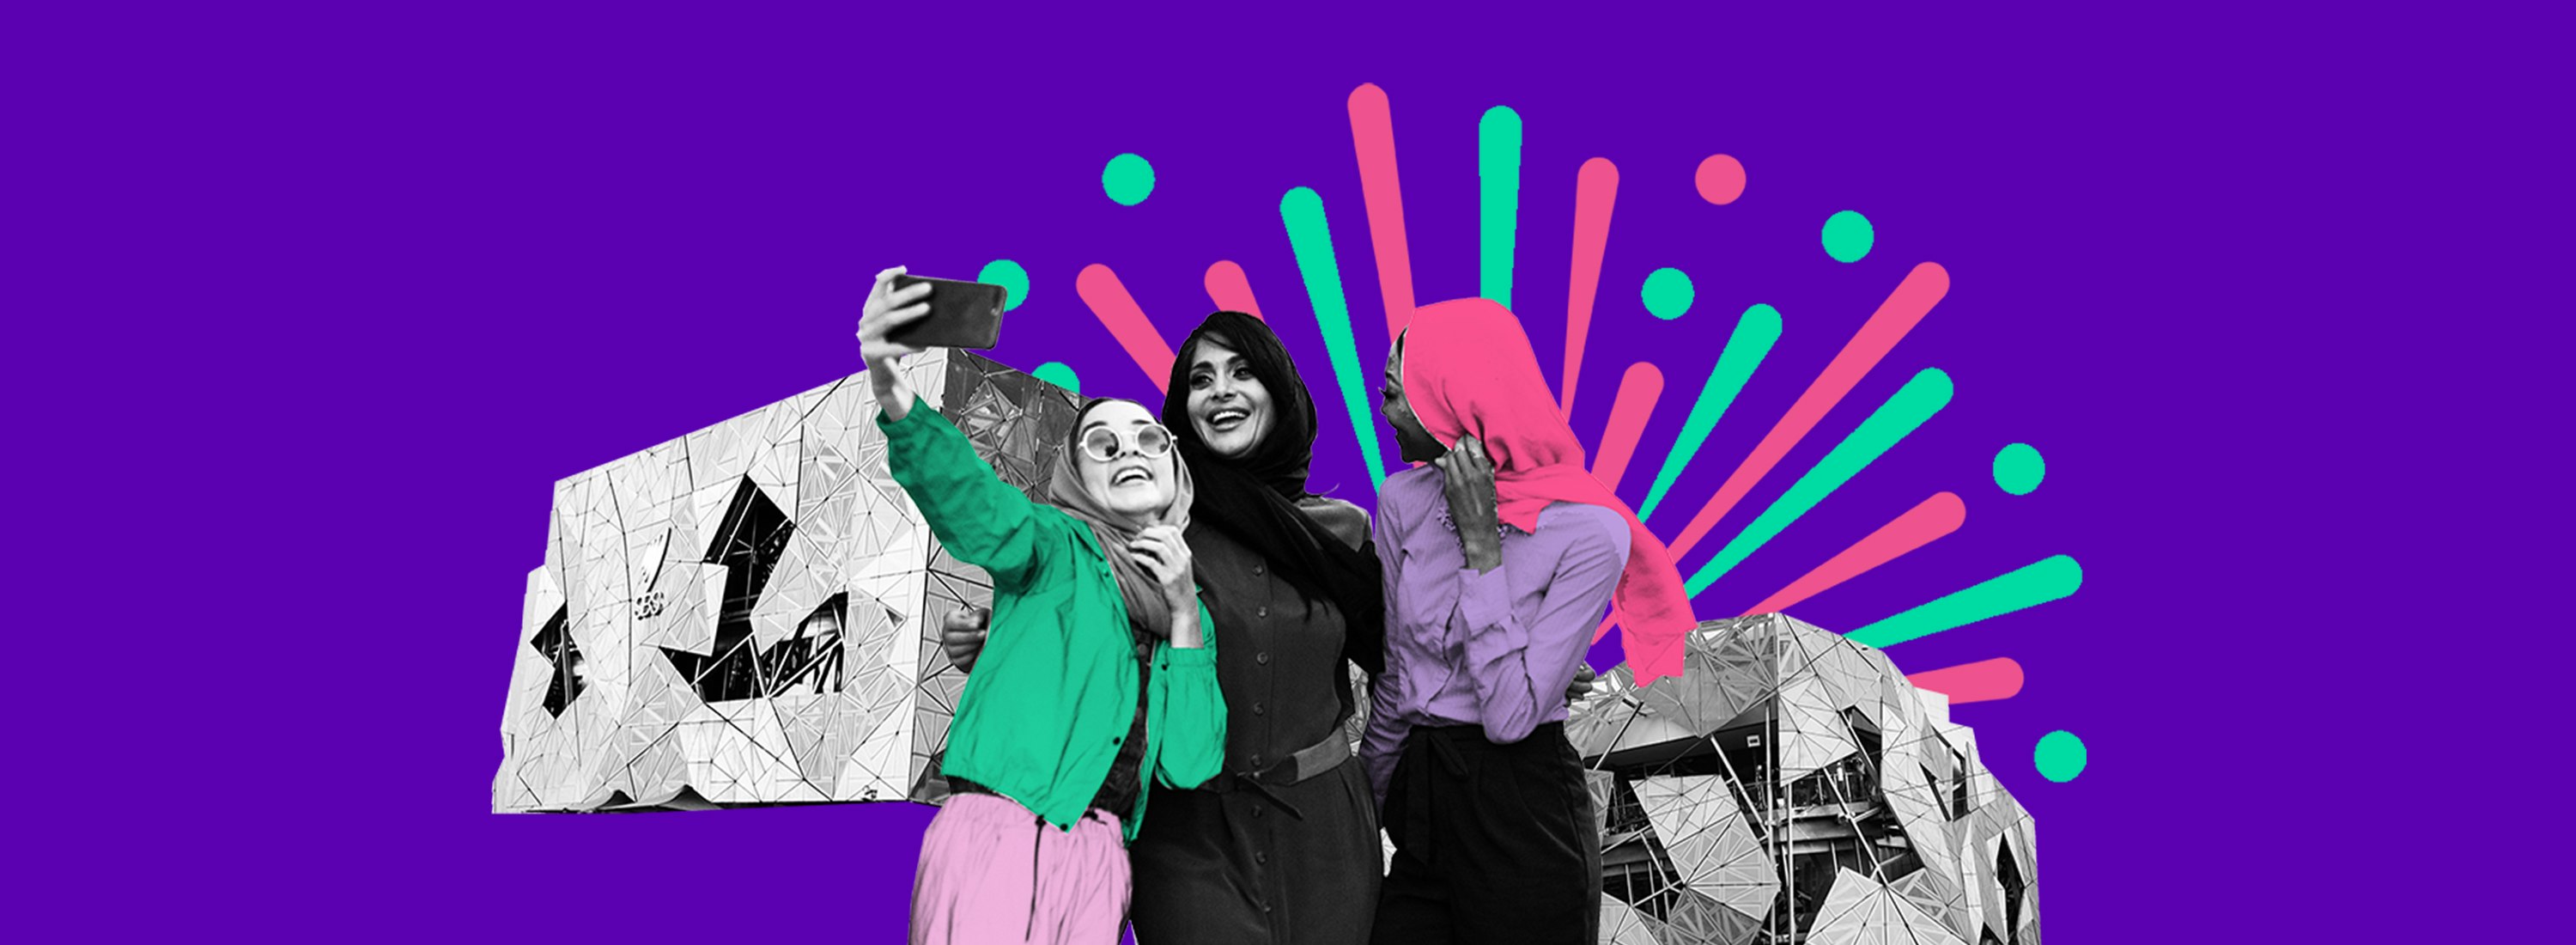 An illustration of three women talking a selfie with fed square and a colourful burst behind them on a purple background